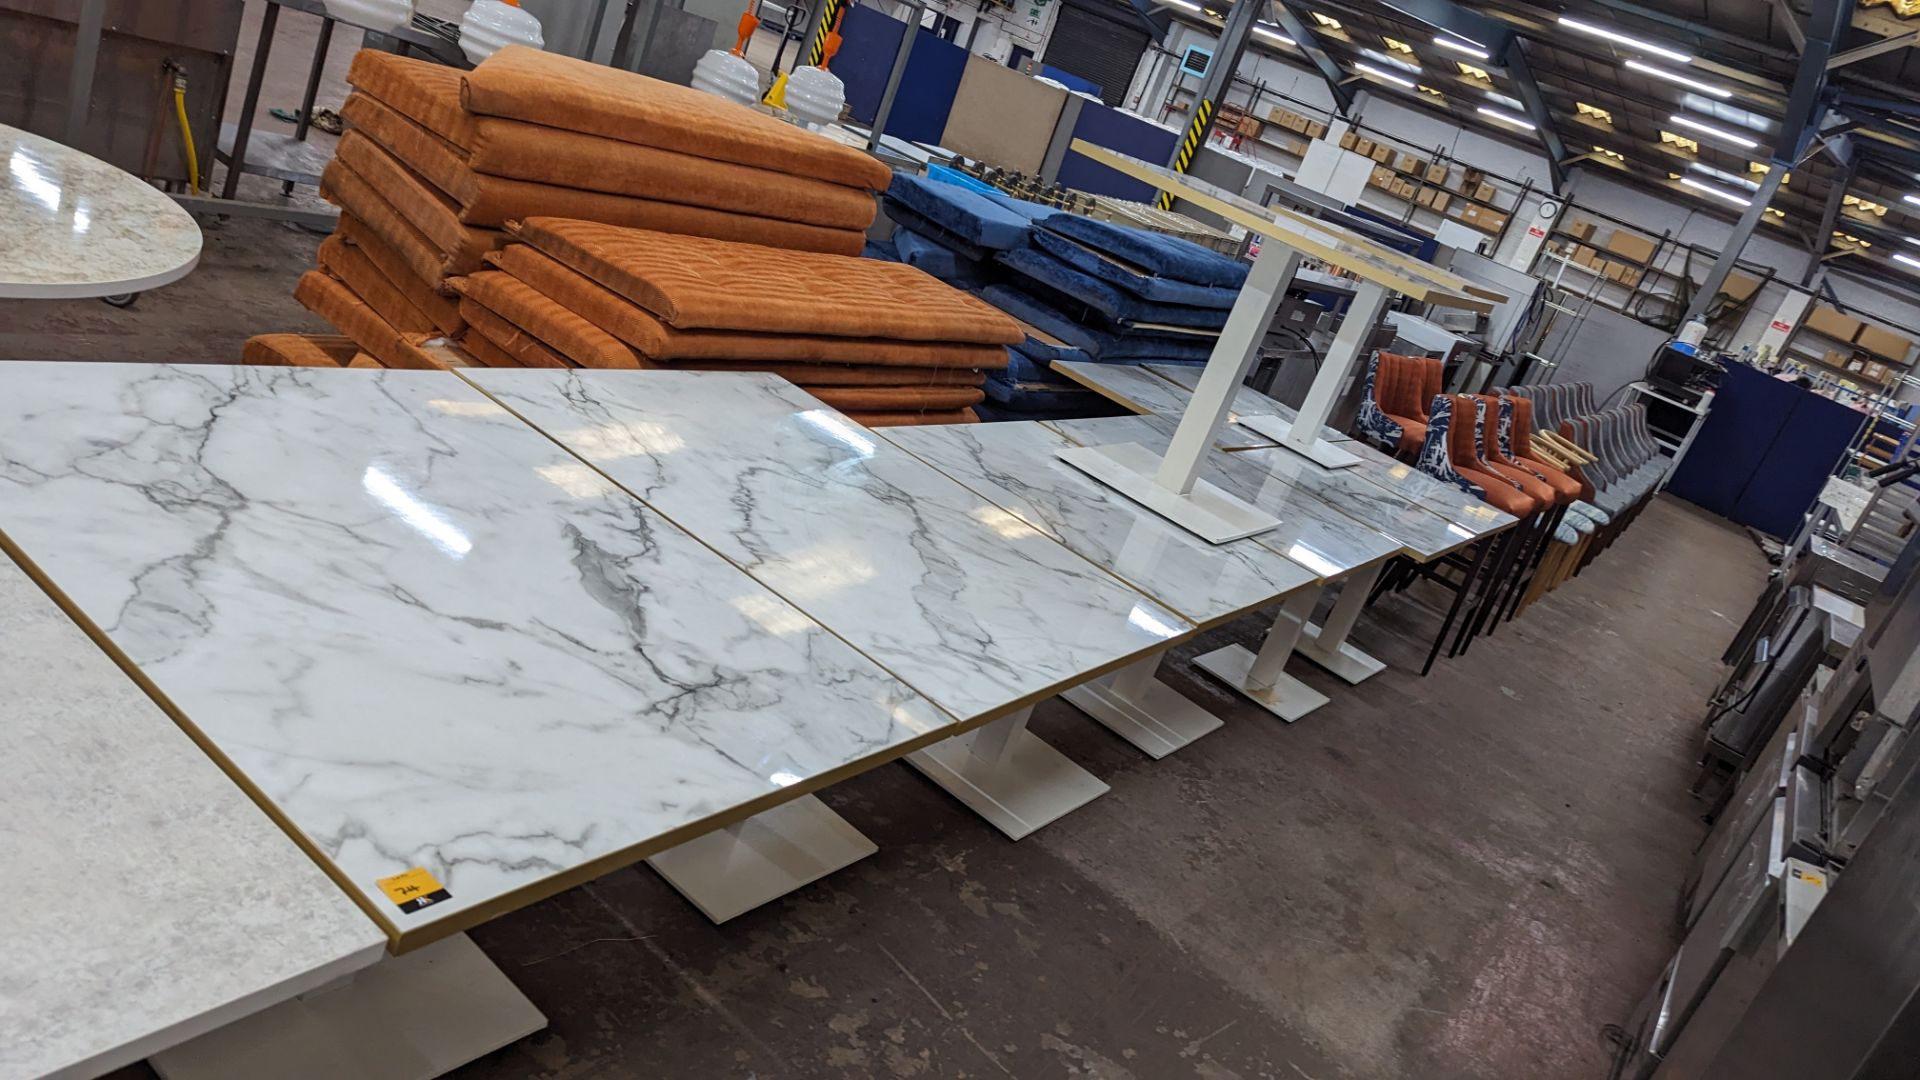 10 off matching dining tables in 3 different sizes with marble effect tops. 2 of the tables are ret